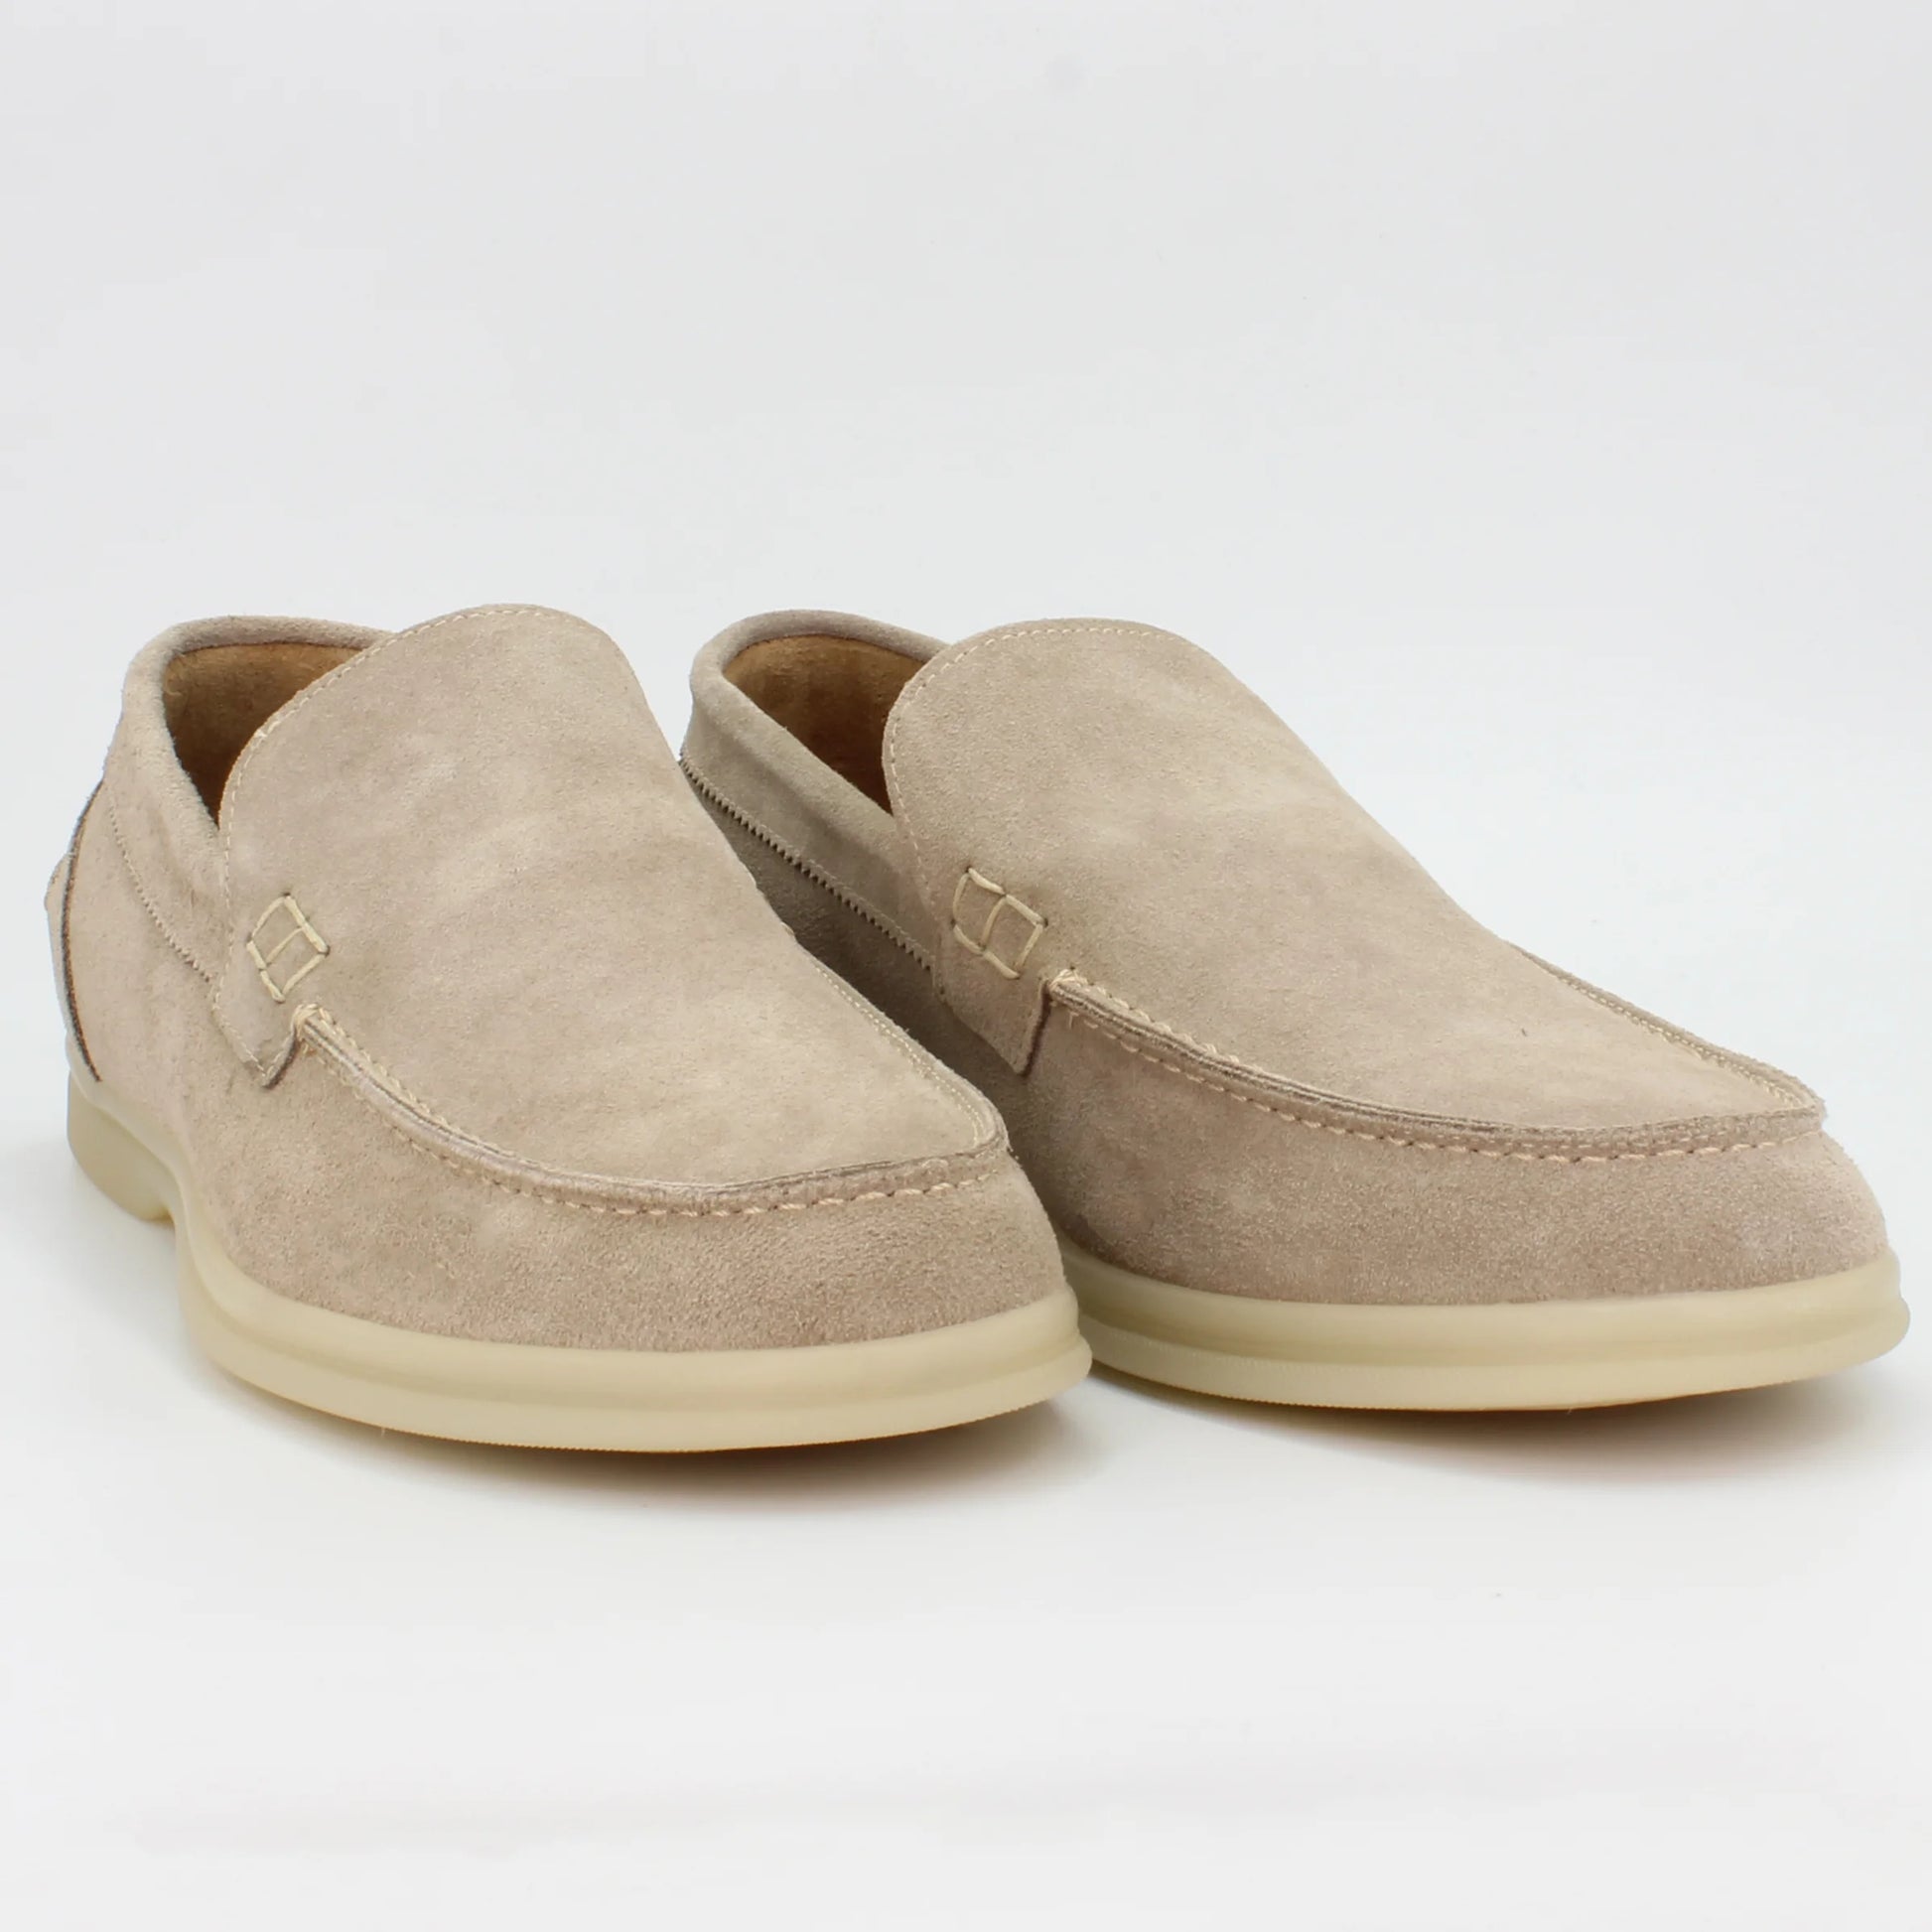 Shop Handmade Italian Leather moccasin in taupe (BER2) or browse our range of hand-made Italian shoes for men in leather or suede in-store at Aliverti Cape Town, or shop online. We deliver in South Africa & offer multiple payment plans as well as accept multiple safe & secure payment methods.